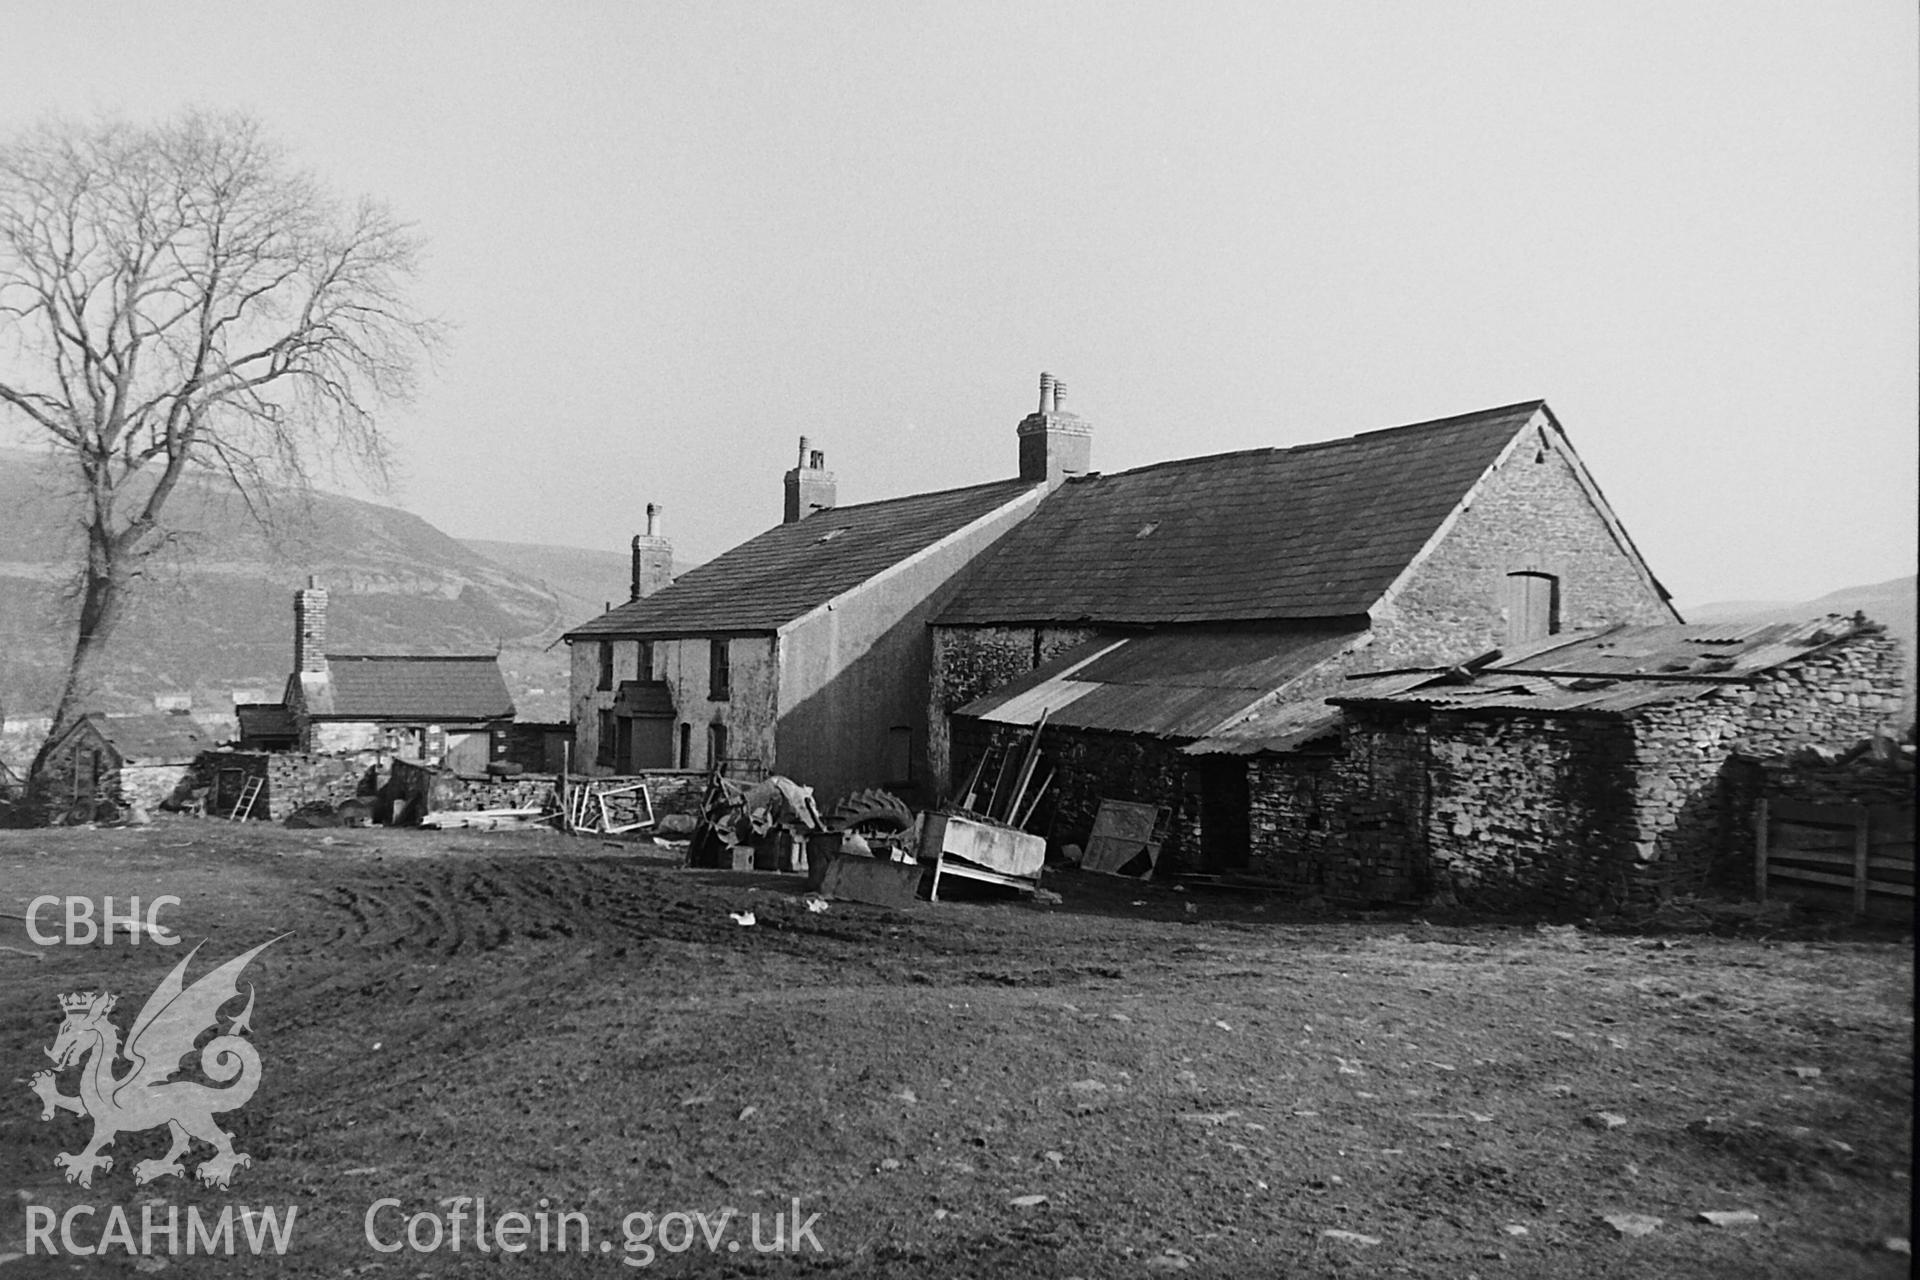 Black and white photo showing exterior view of Gellifaelog, Tonypandy  taken by Paul R. Davis in 1984, before demolition.